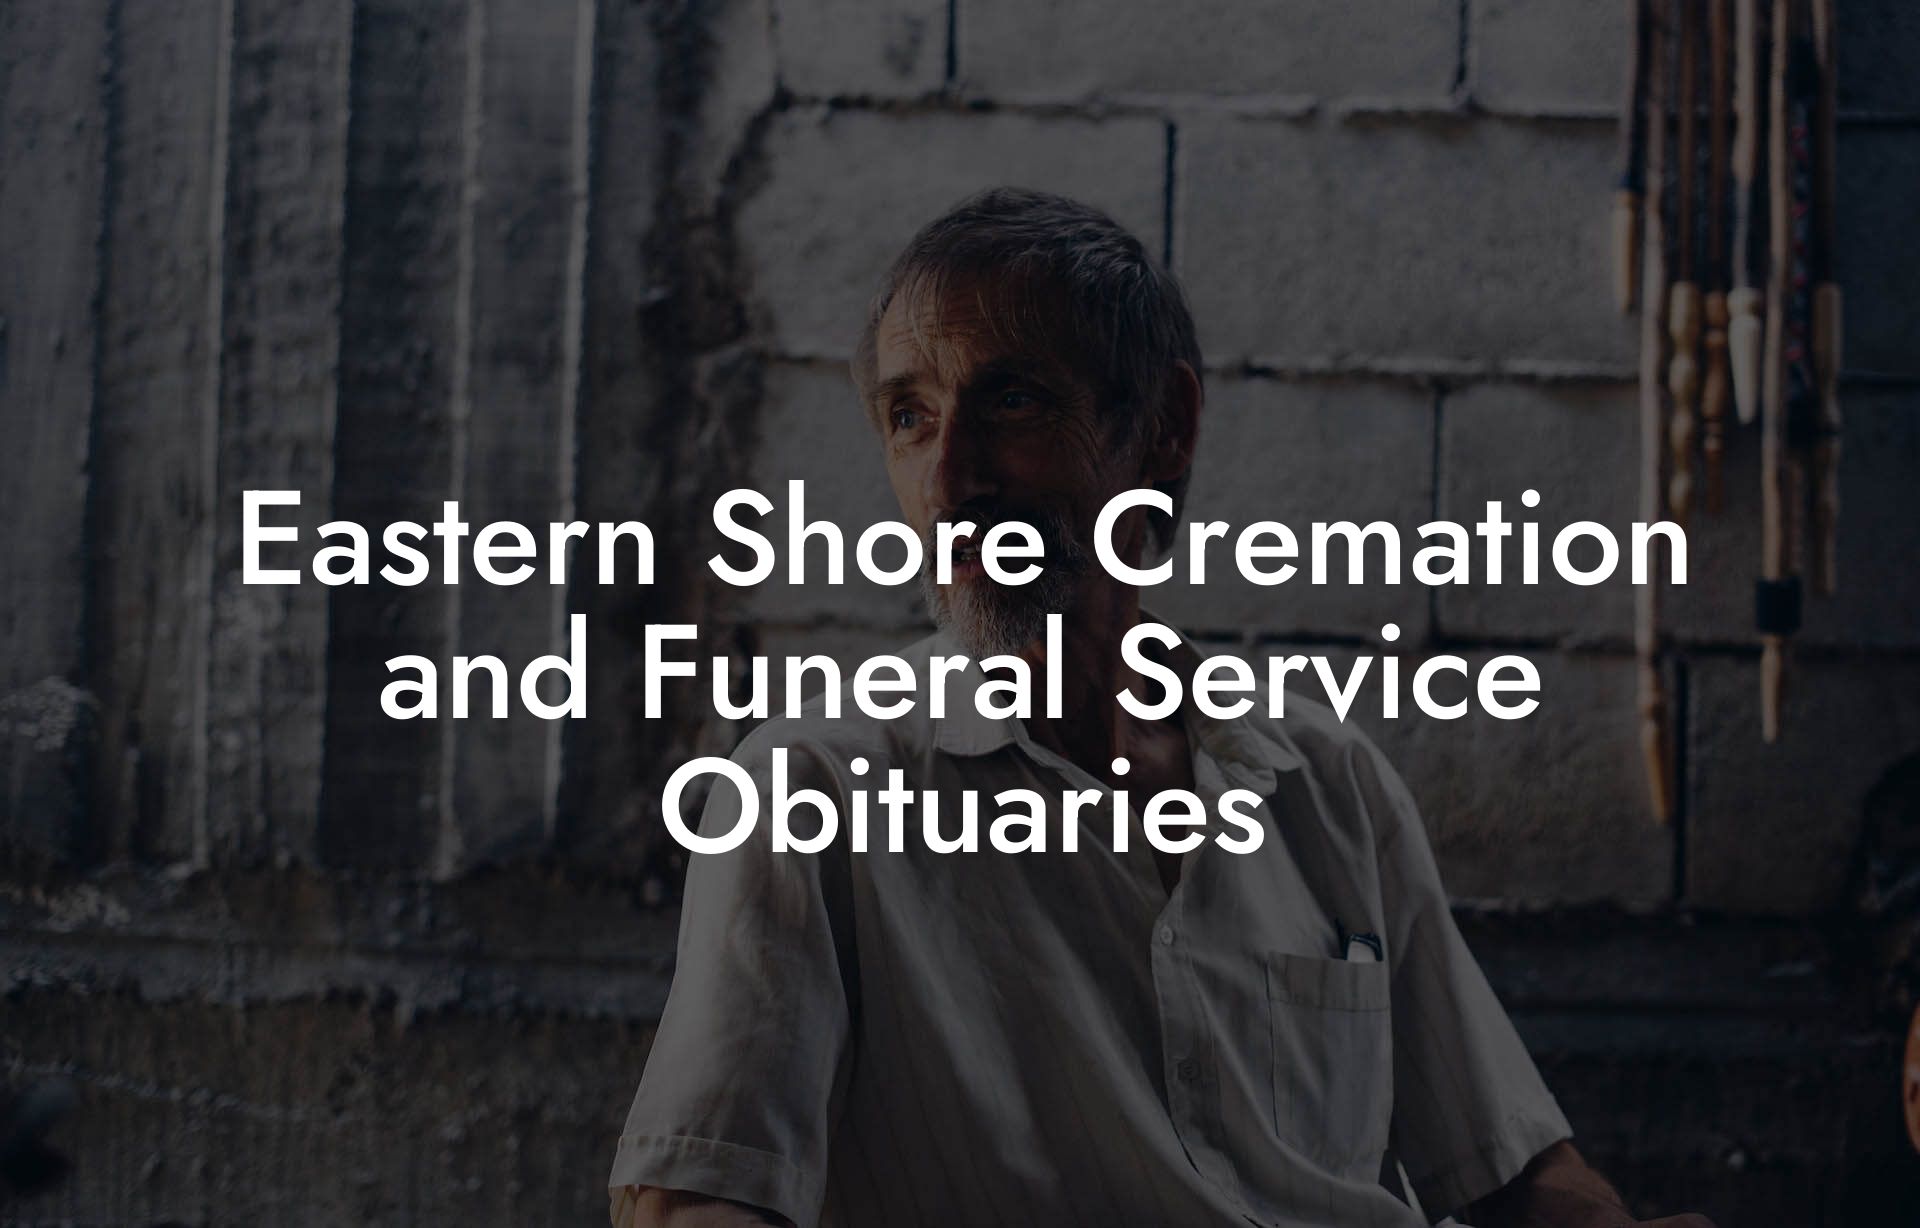 Eastern Shore Cremation and Funeral Service Obituaries